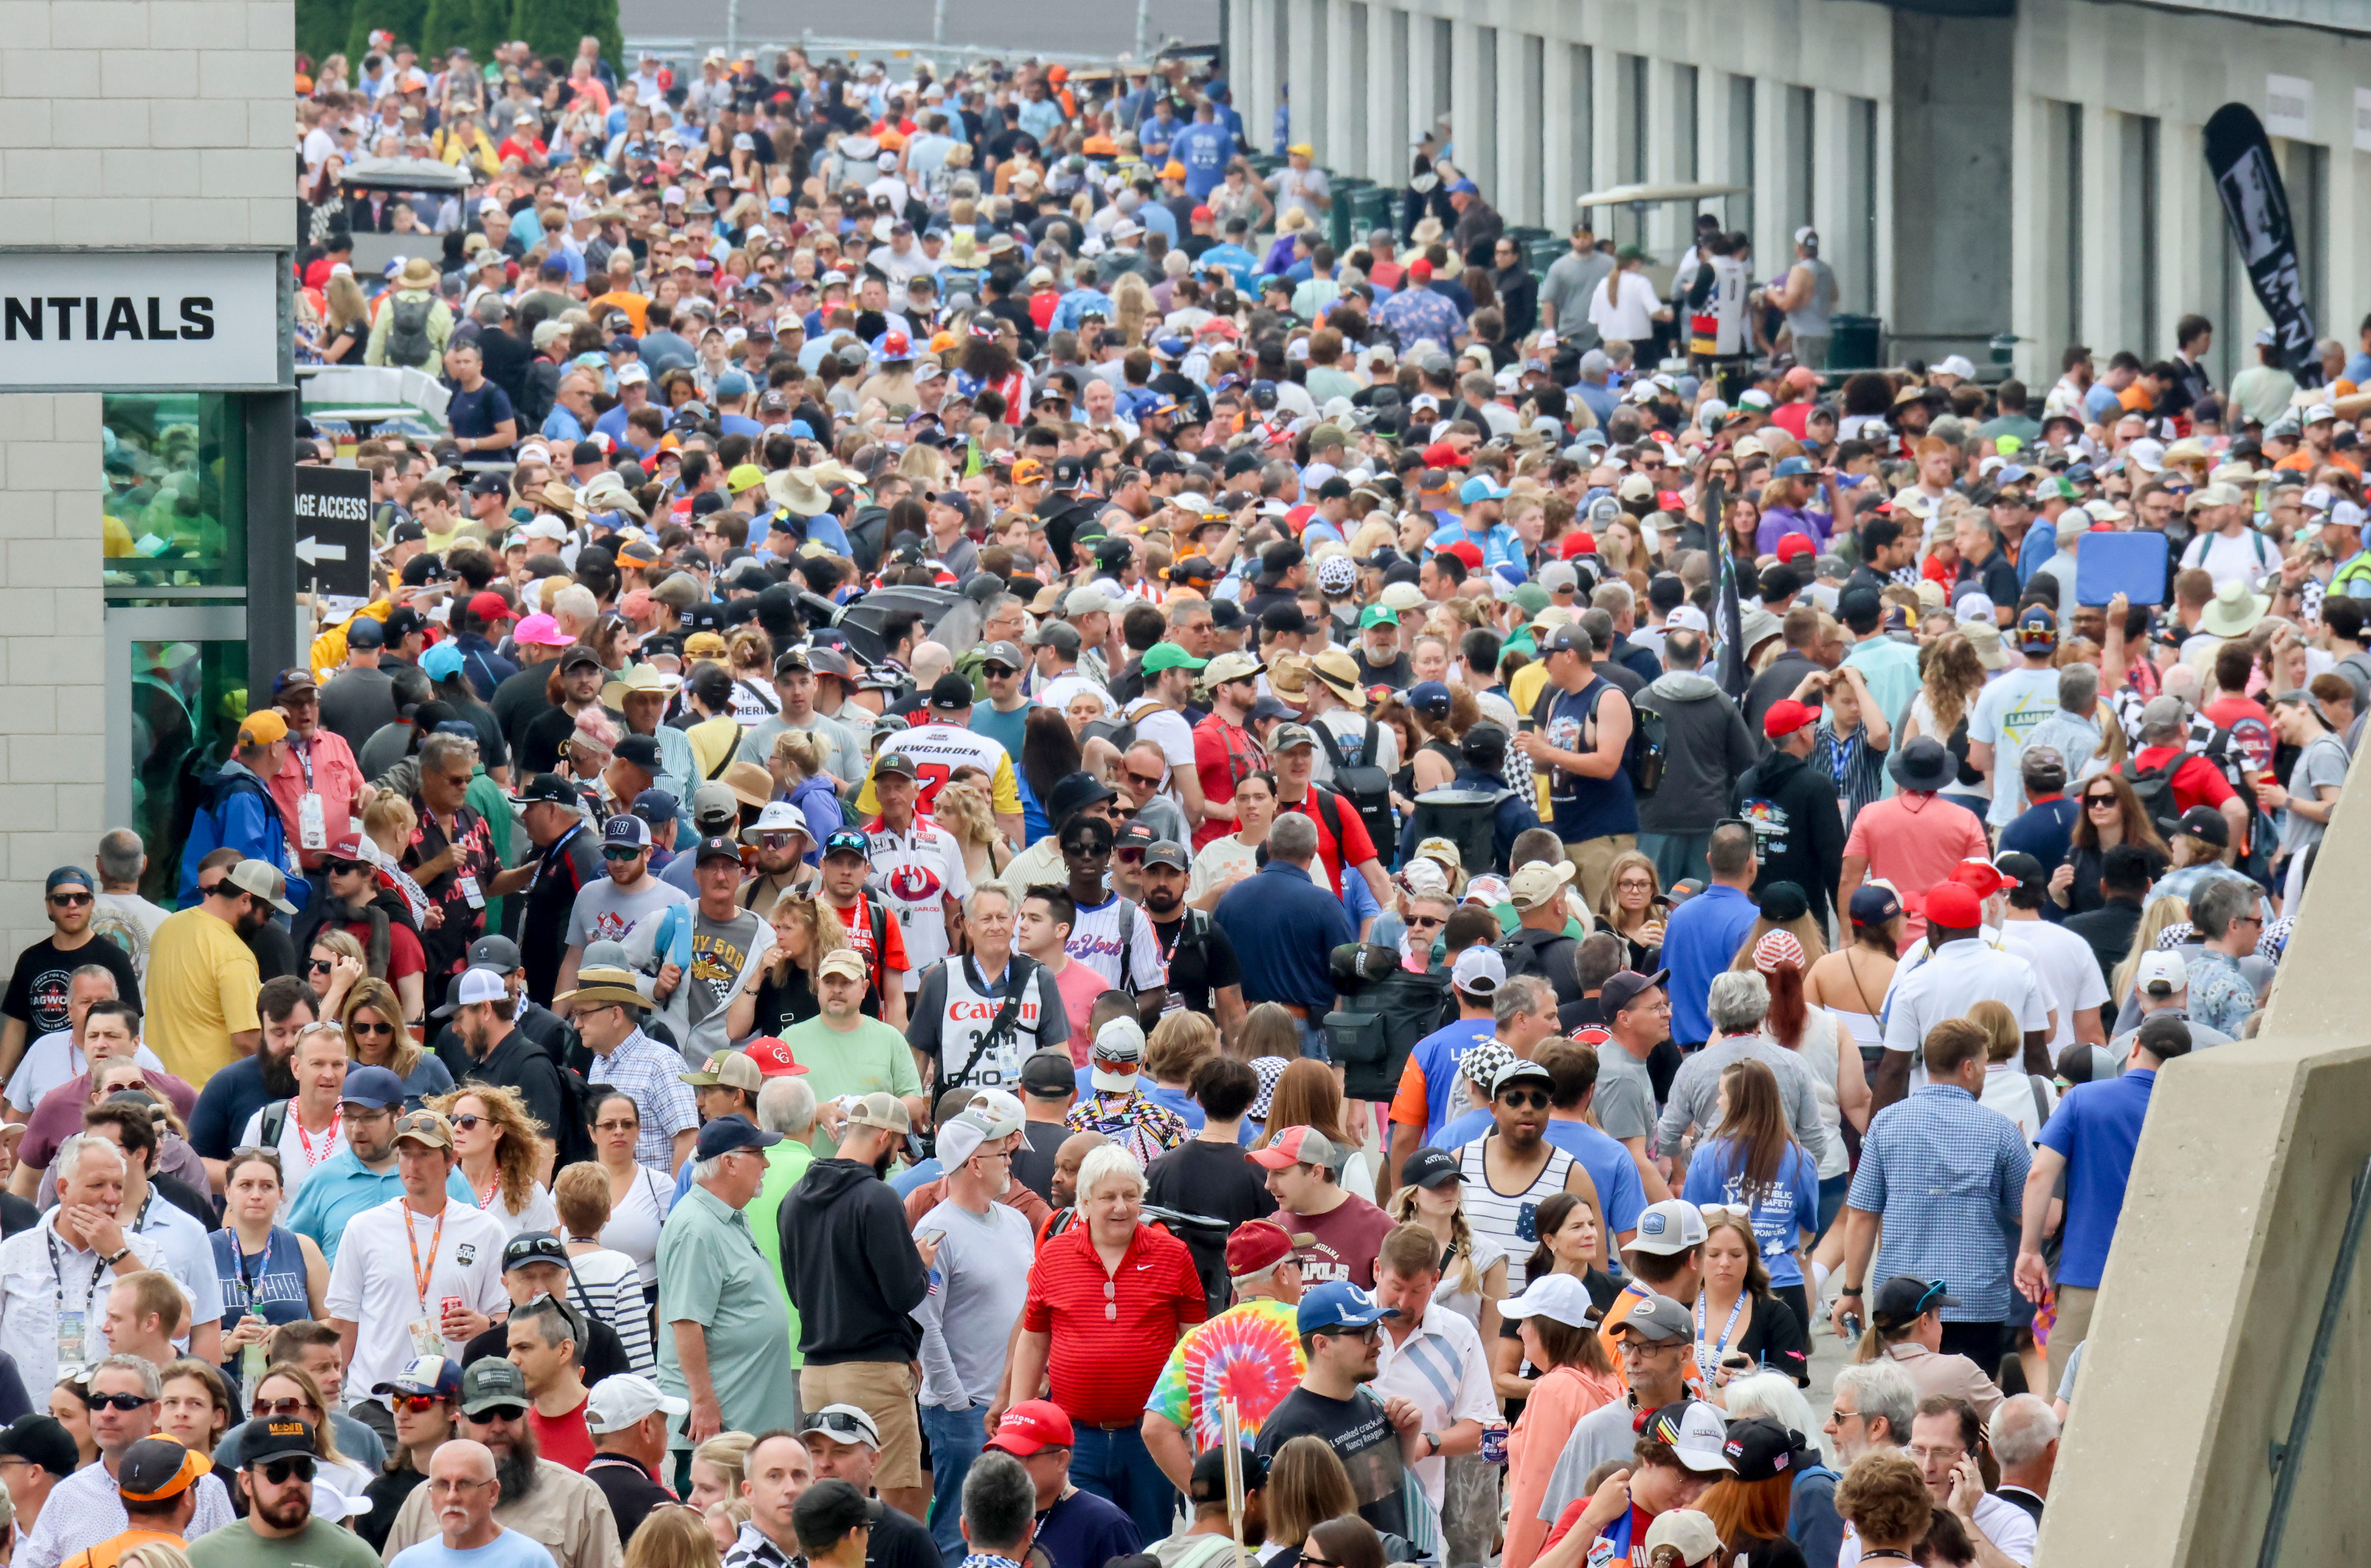 IMS delays start of Indy 500, asks fans to vacate grandstands and Snake Pit to seek shelter